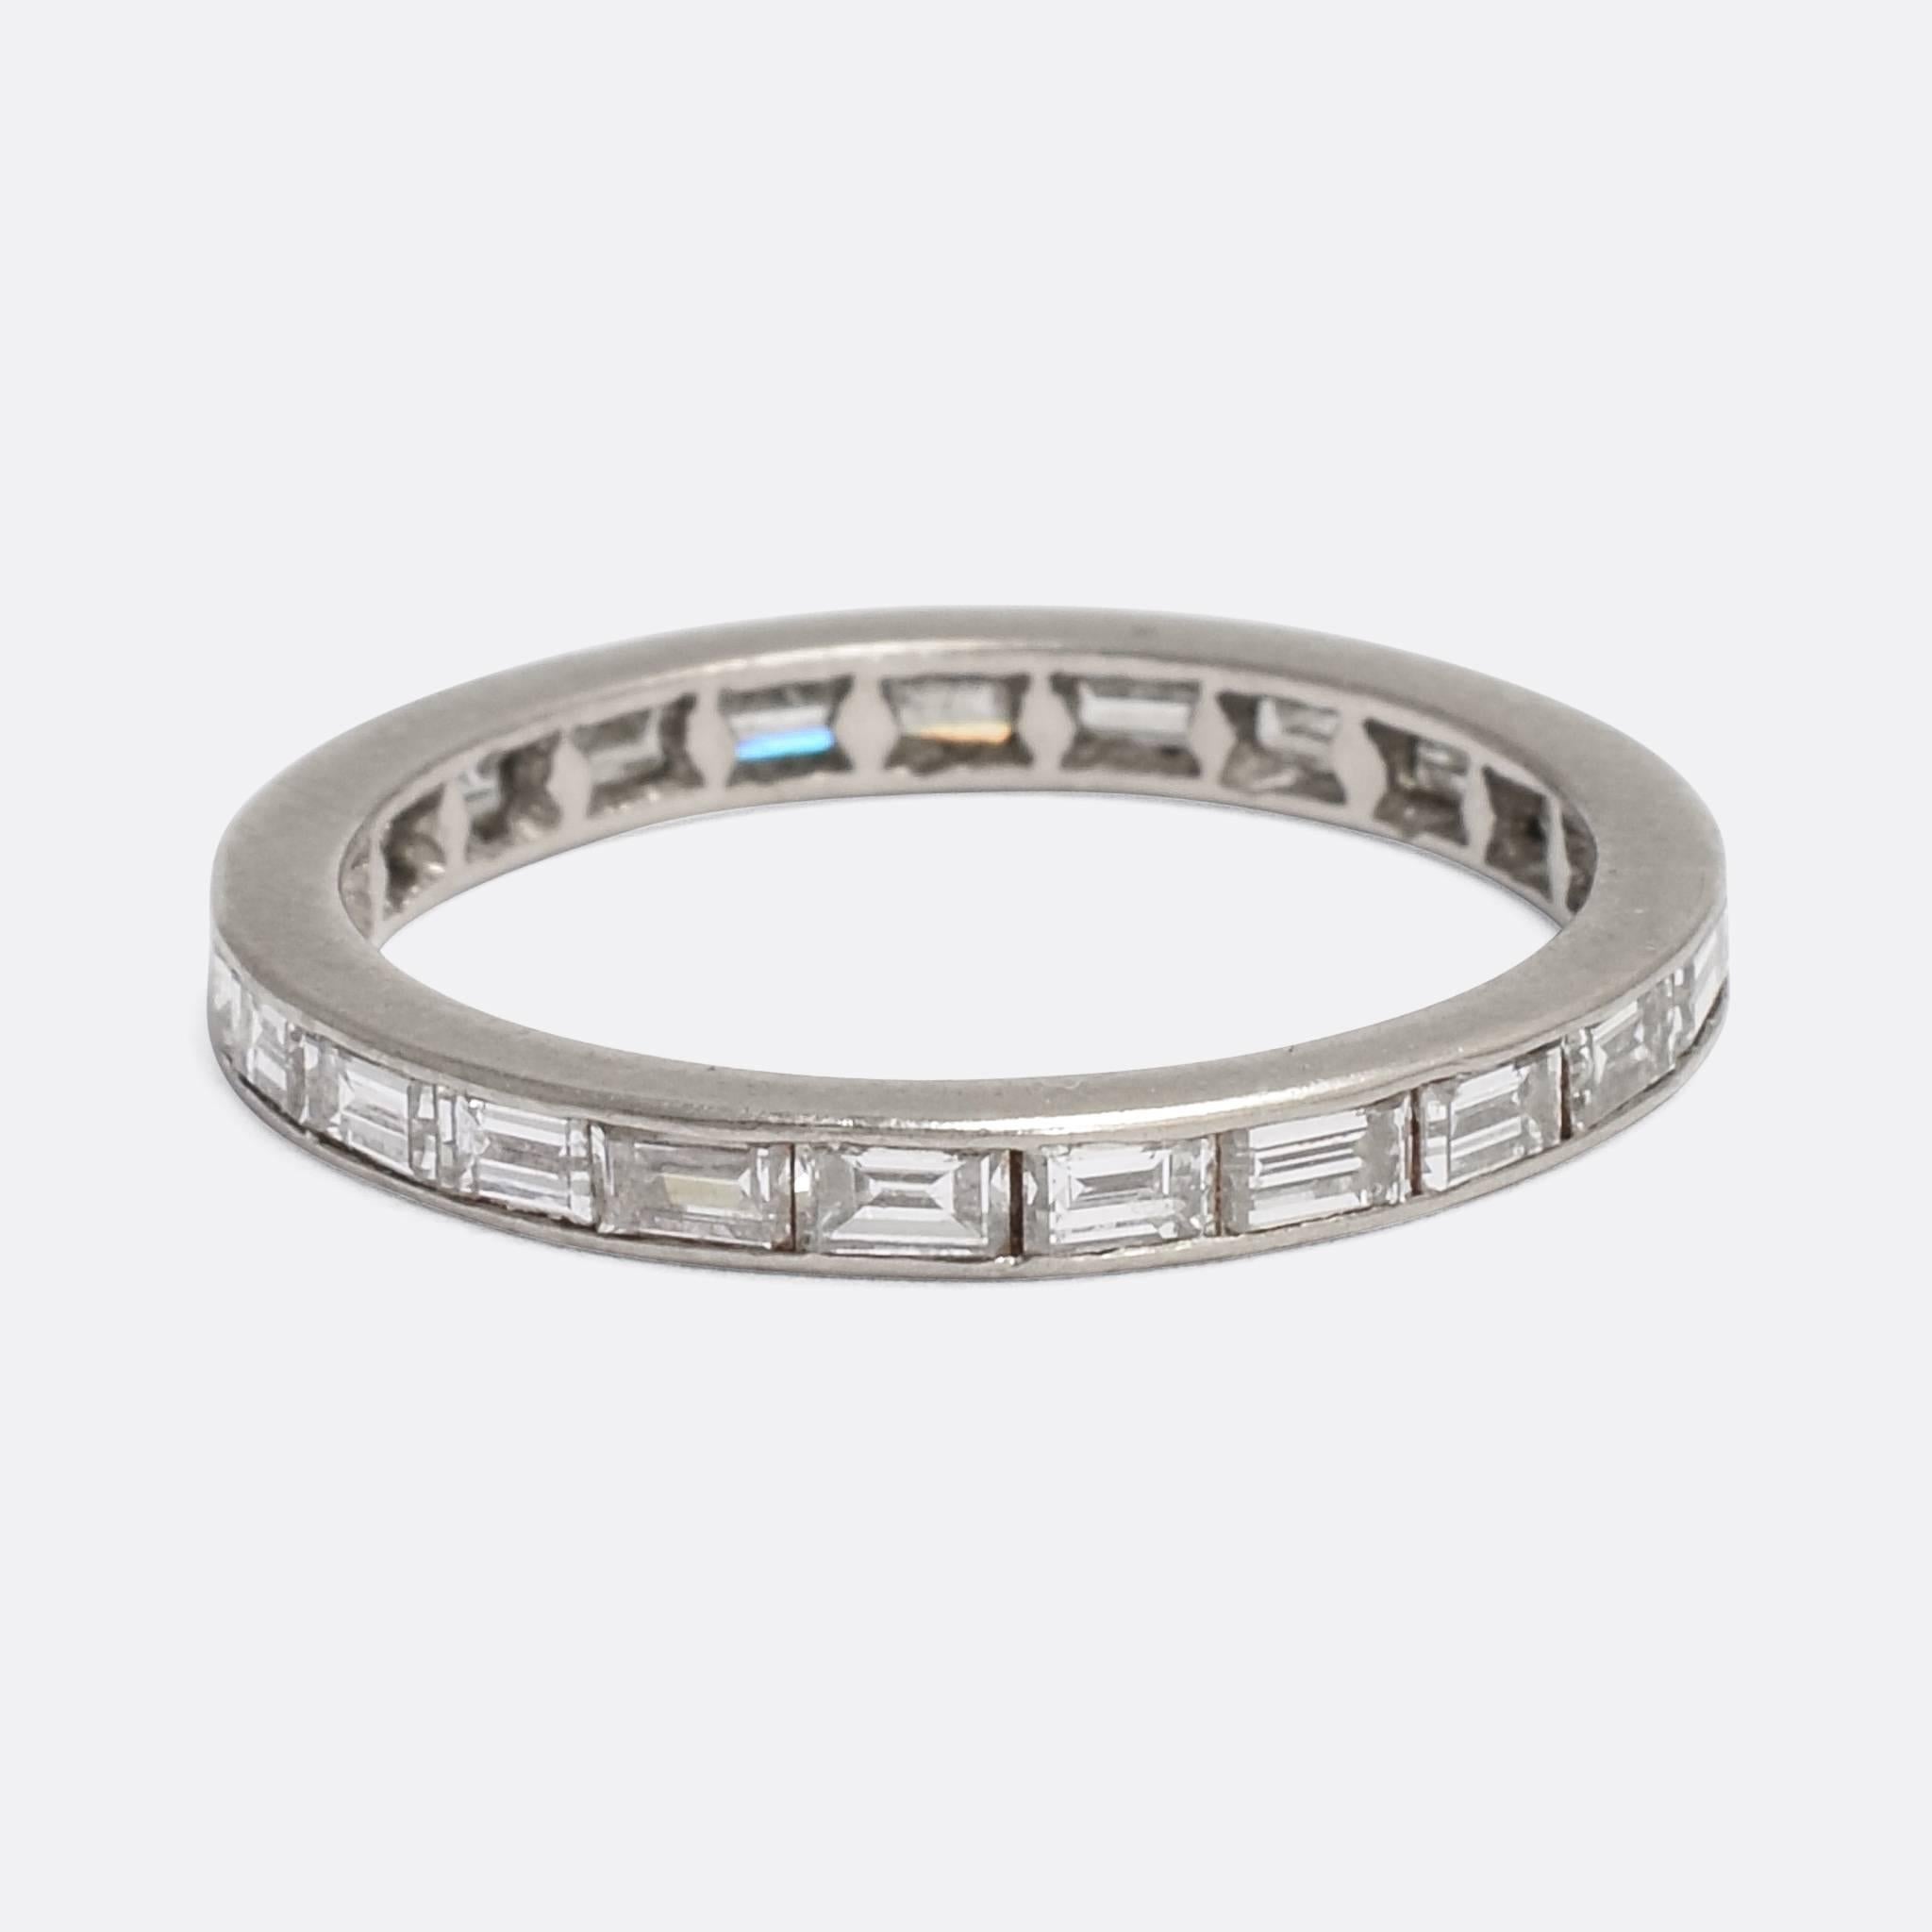 A sleek vintage eternity ring, channel set with baguette cut diamonds. It's modelled in platinum throughout, as was typical from the early 20th Century onwards, but unusually it is fully set with baguette cuts. A stylish and timeless